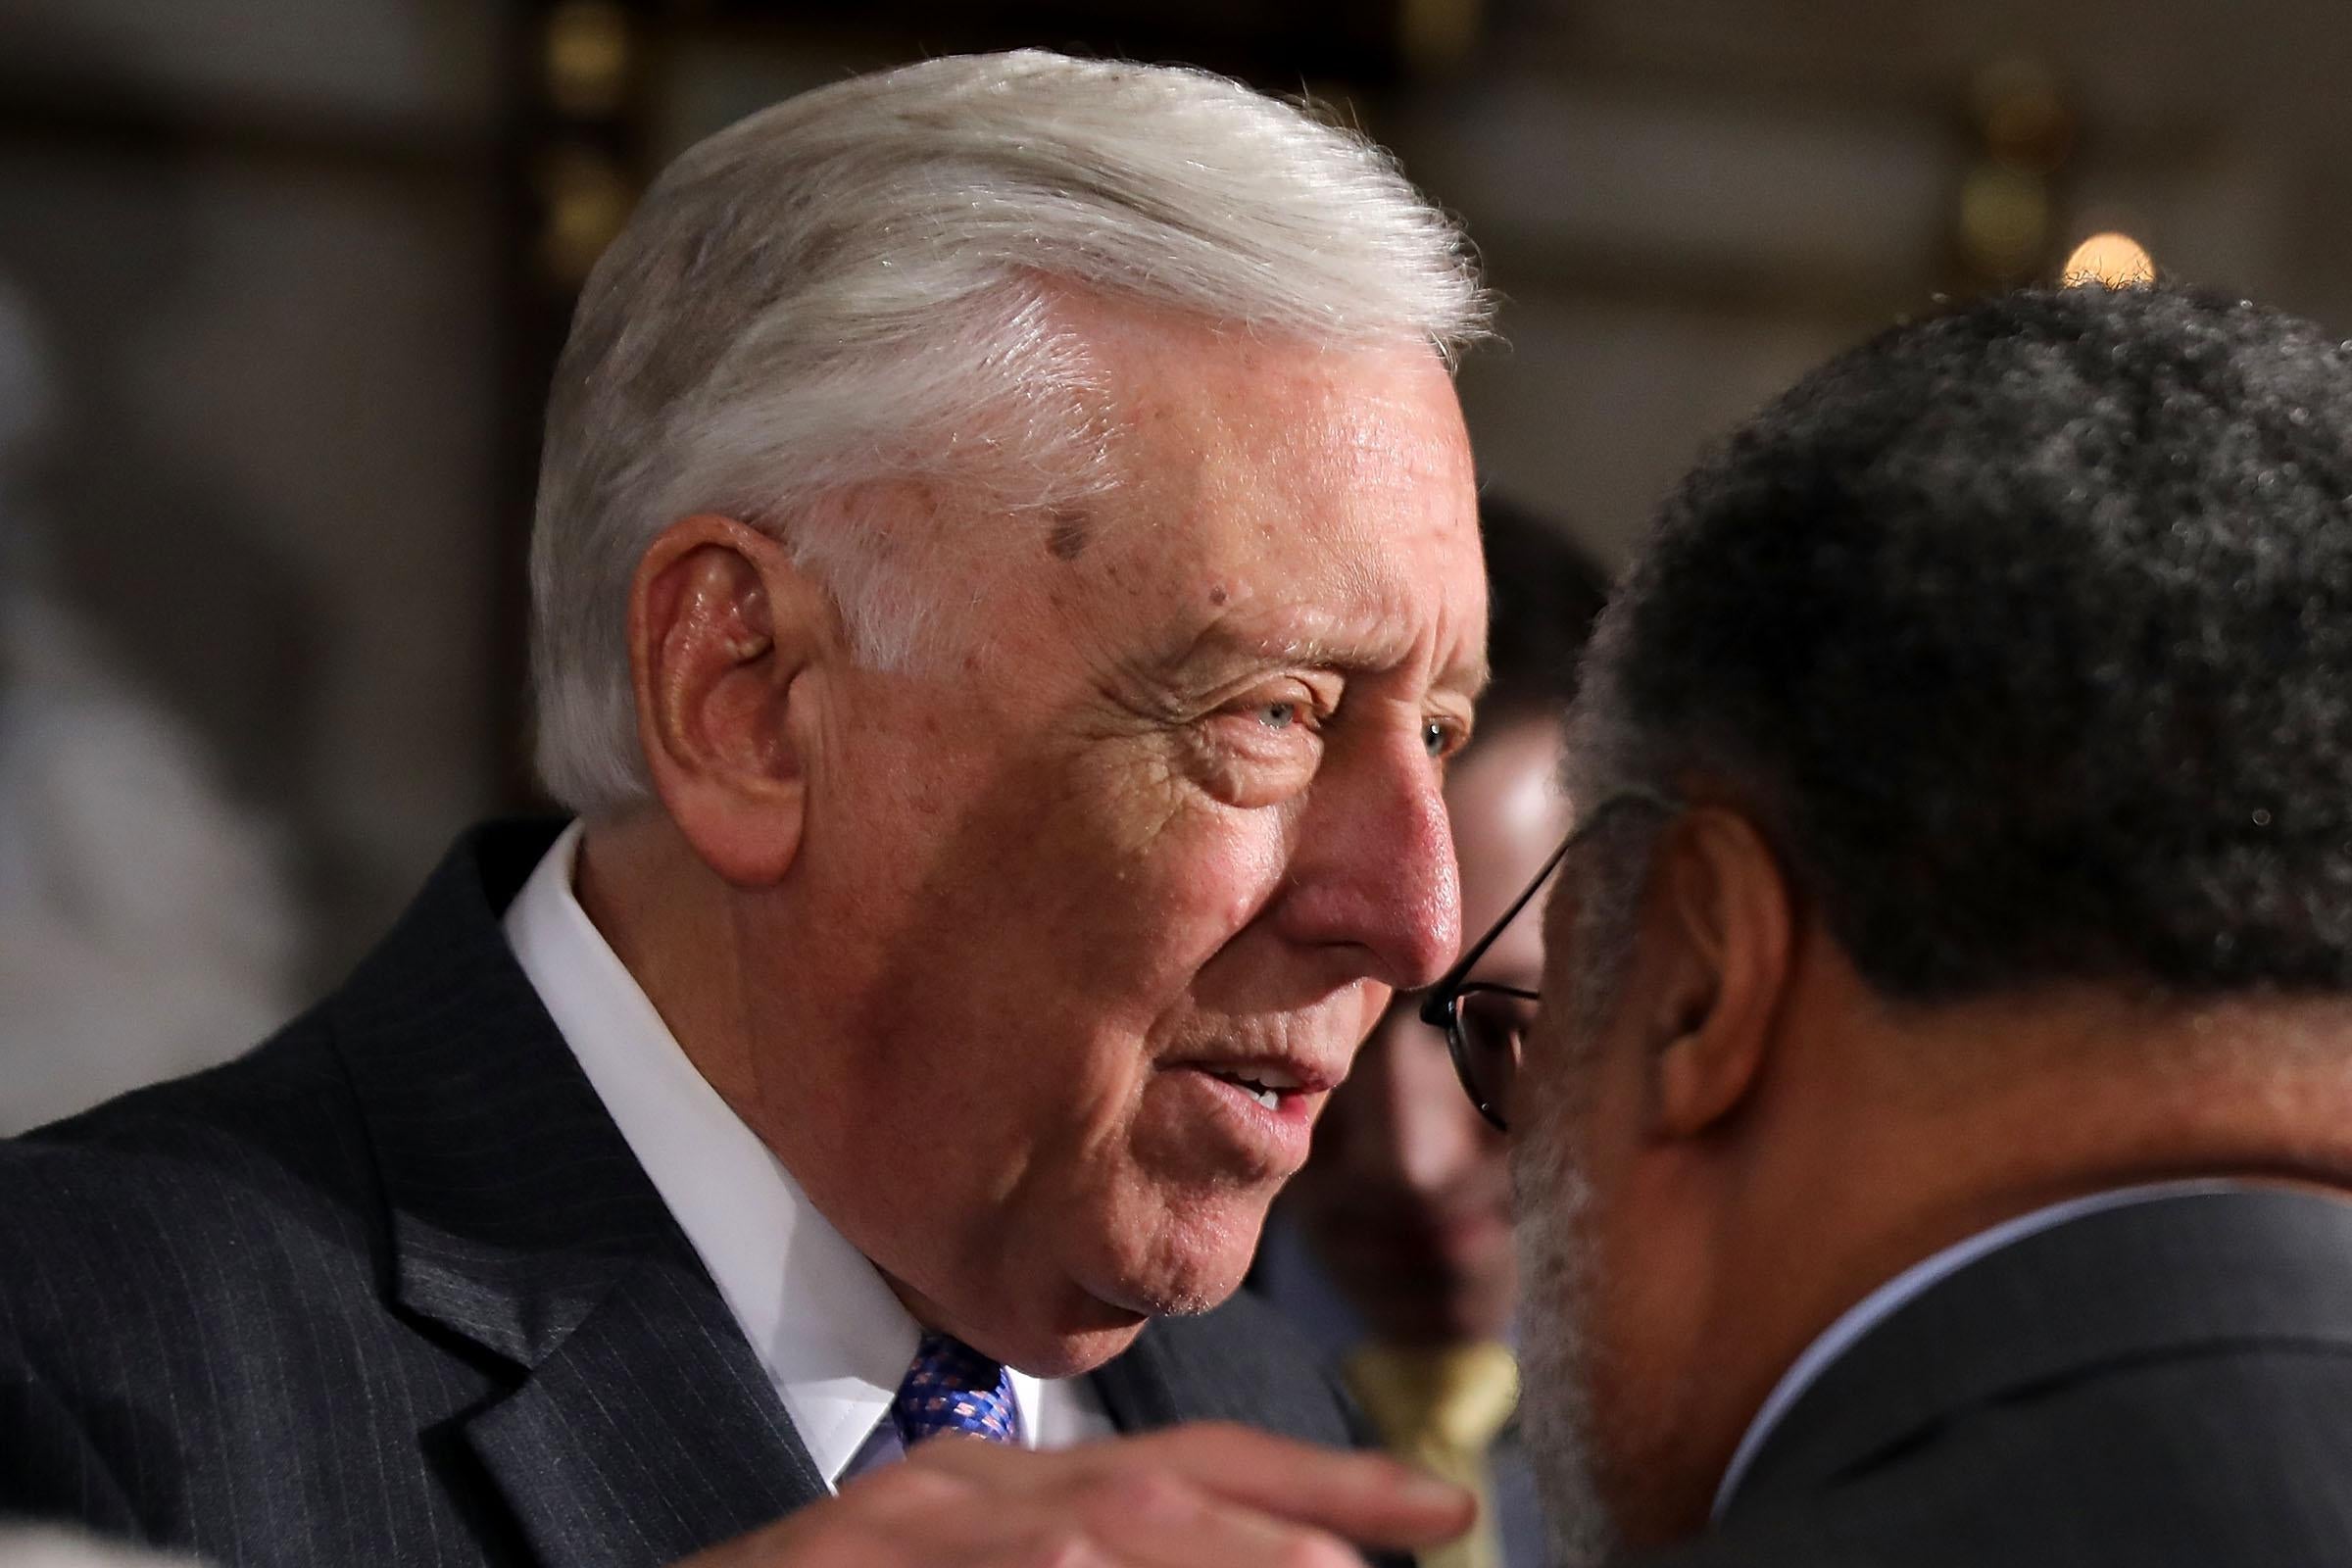 WASHINGTON, DC - APRIL 12:  House Minority Whip Steny Hoyer (D-MD) (L) talks with the Smithsonian's National Museum of African American History and Culture founding Director Lonnie Bunch at the conclusion of a ceremony to mark the 50th anniversary of the assassination of Dr. Martin Luther King Jr. with House Minority Leader Nancy Pelosi (D-CA) (L) and Speaker of the House Paul Ryan (R-WI) in Statuary Hall at the U.S. Capitol April 12, 2018 in Washington, DC. The House of Representatives memorialized the day that Nobel Peace Prize and American civil rights leader King was killed while supporting a sanitation workers strike in Memphis, Tennessee.  (Photo by Chip Somodevilla/Getty Images)